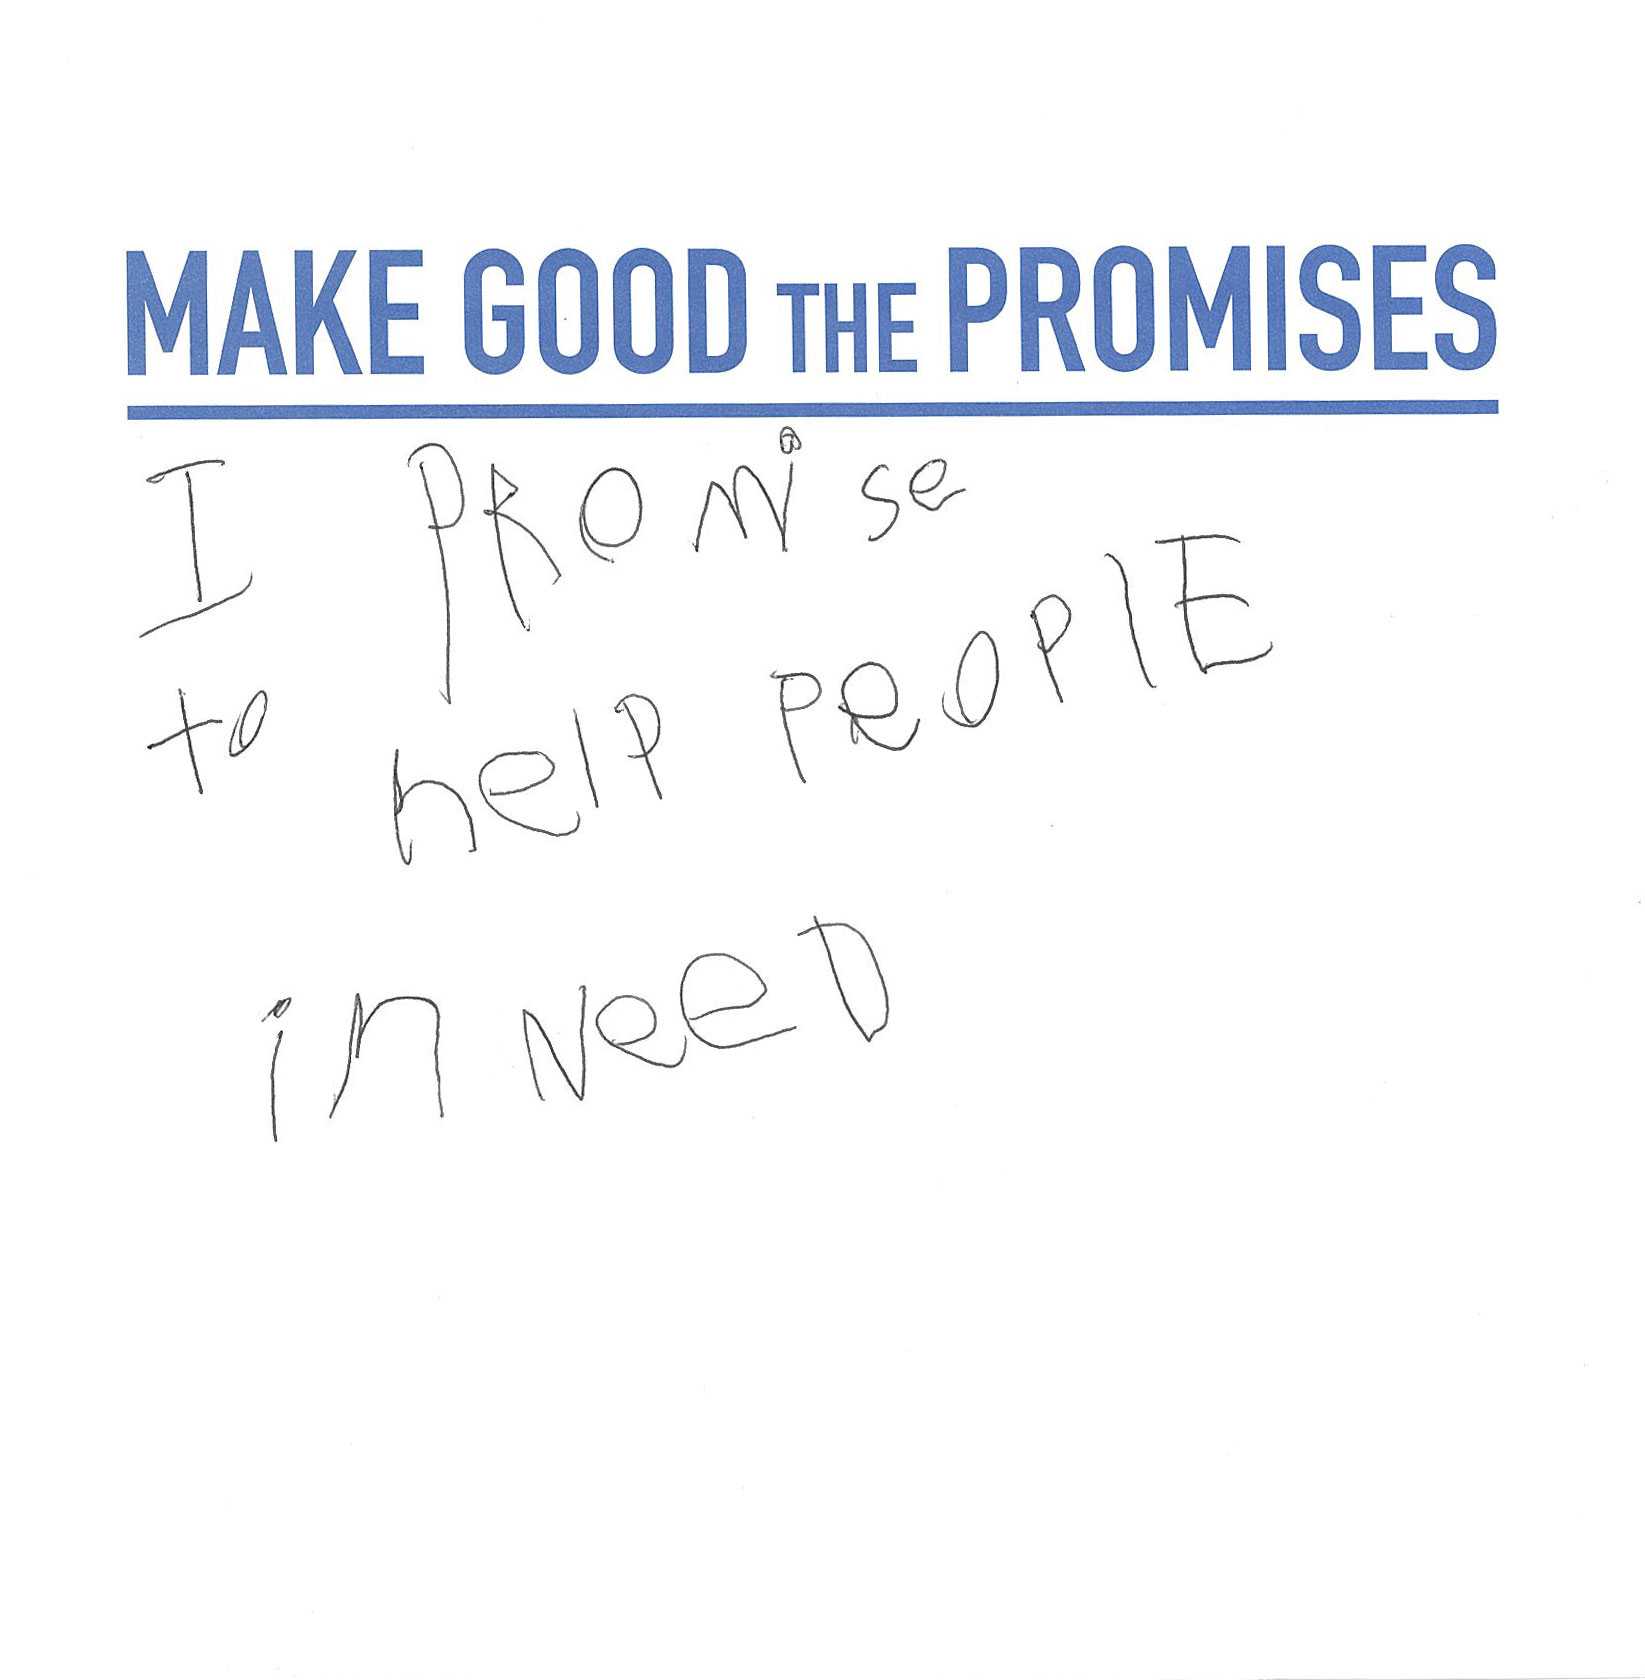 A white card with the message from a young child that says "I promise to help people in need."